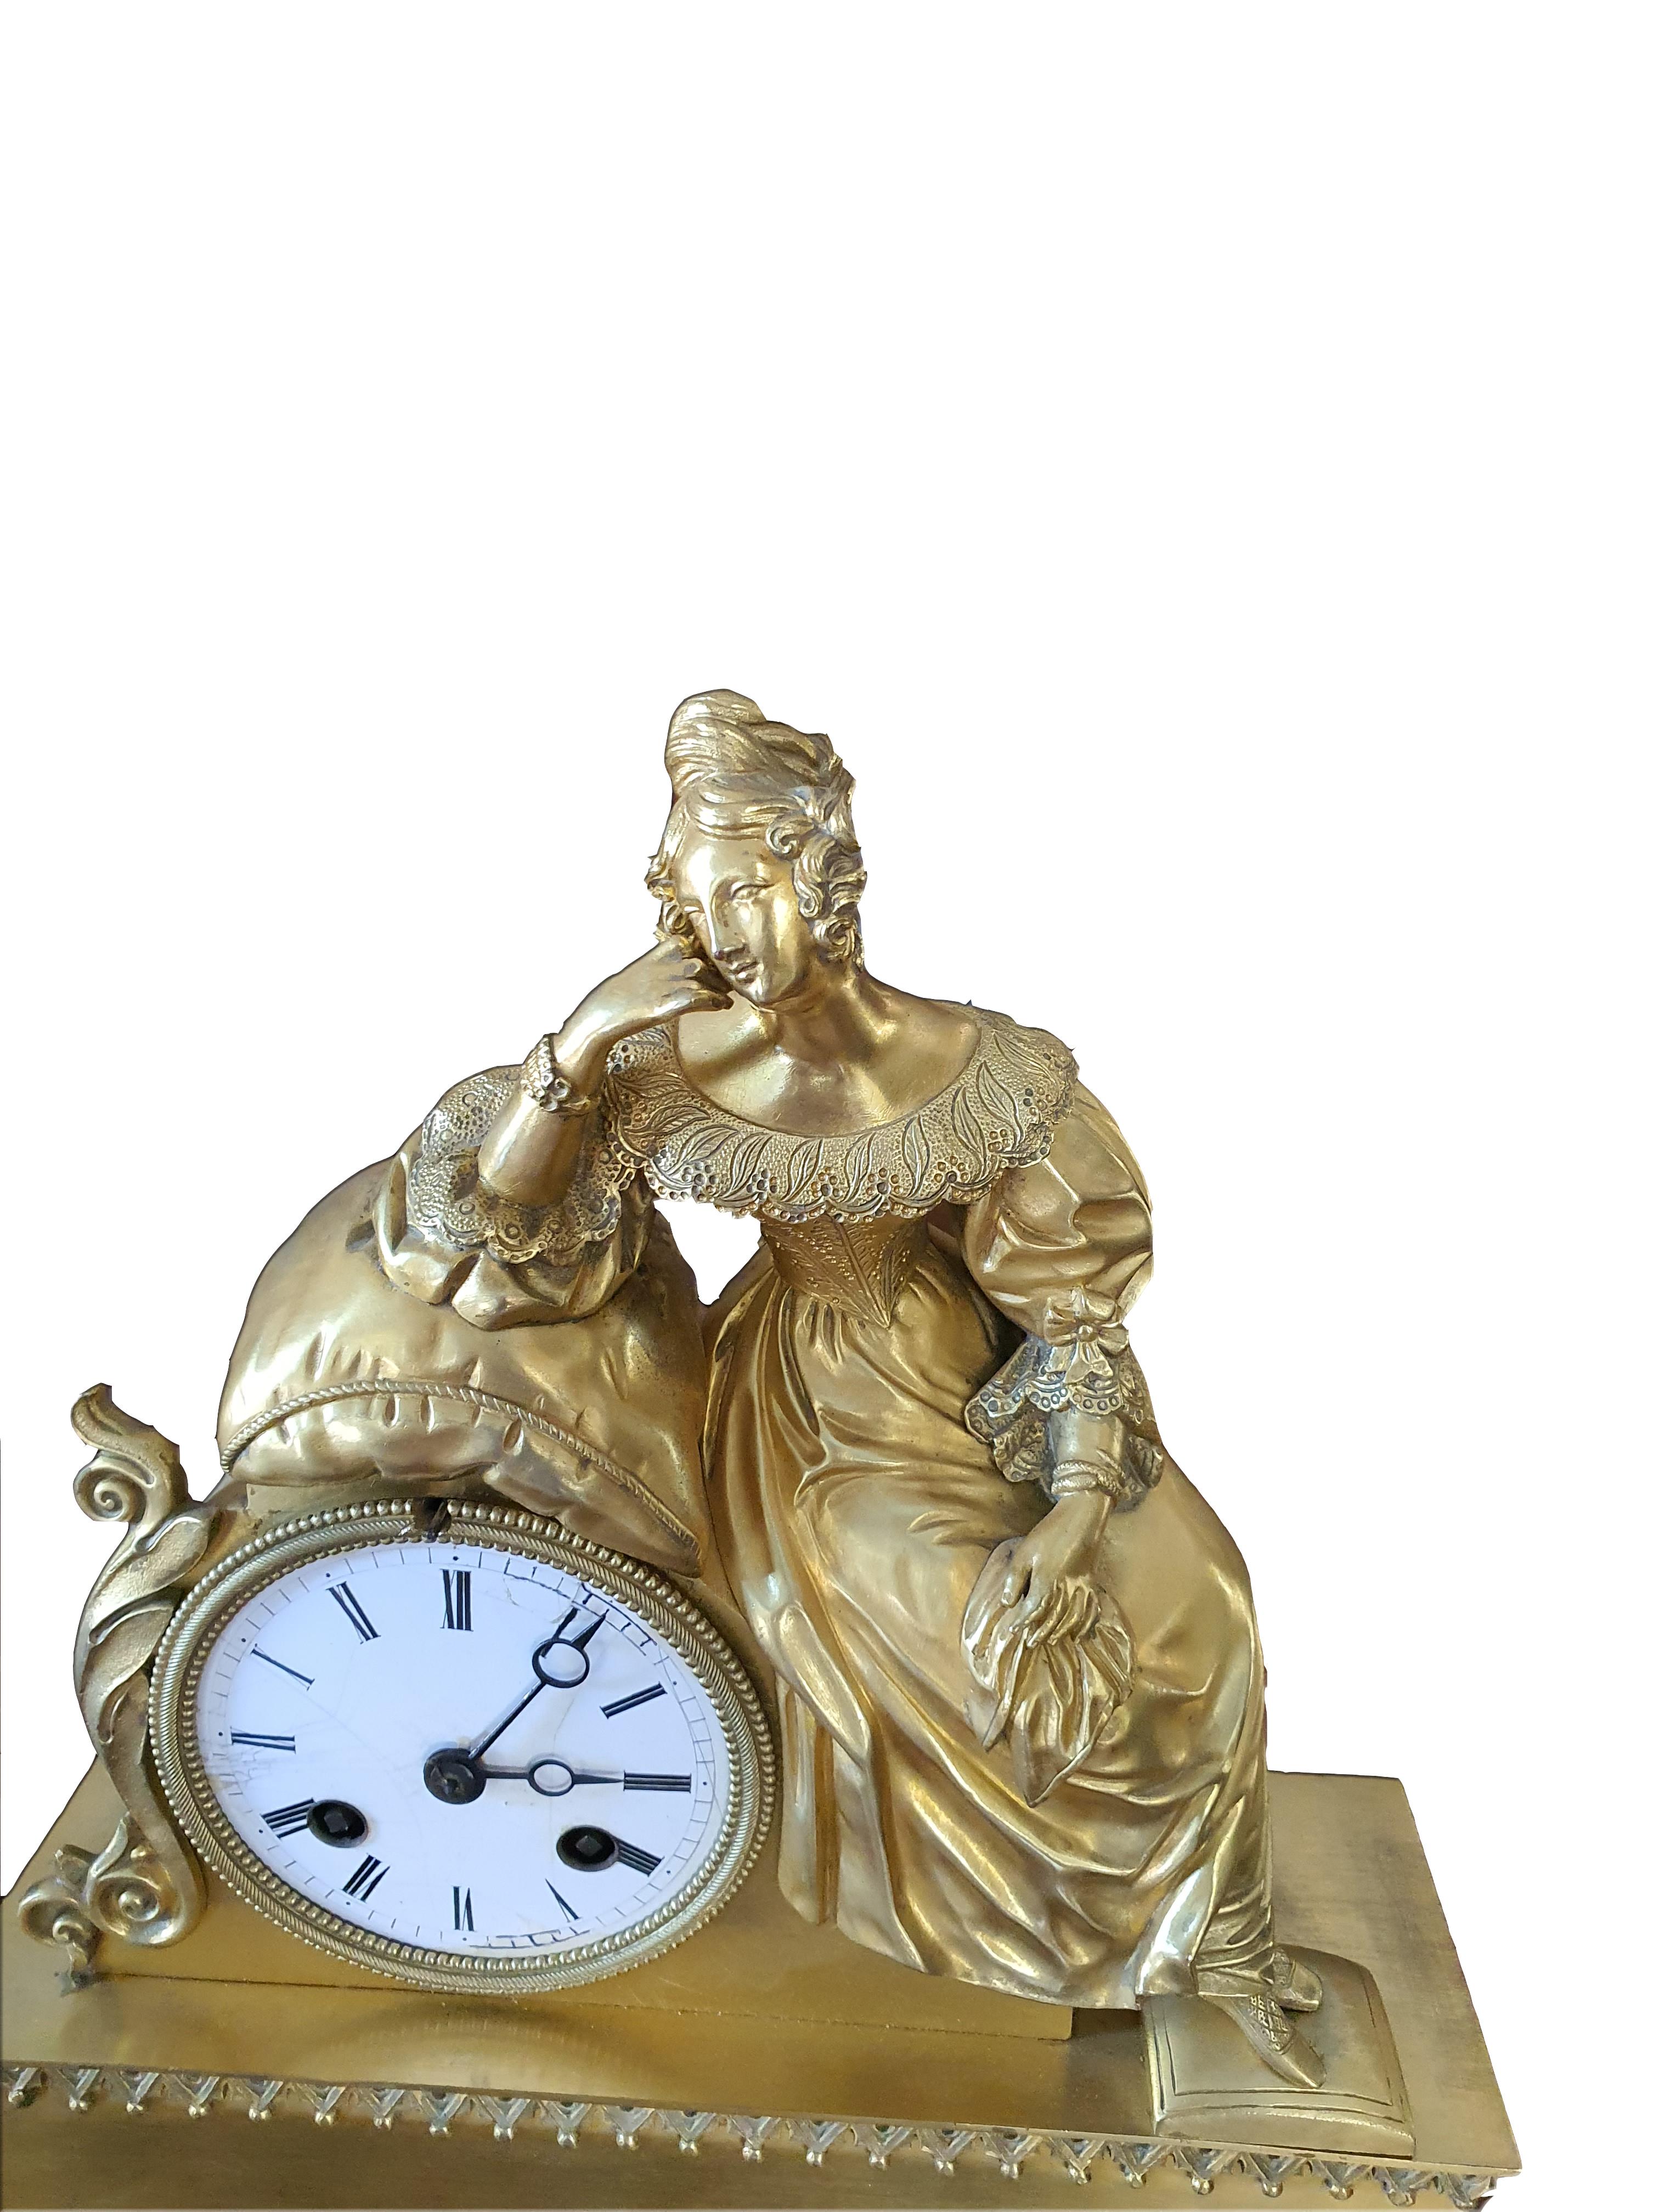 Elegant table clock in finely chiseled and gilded bronze. Parisian figure at the top of the clock.